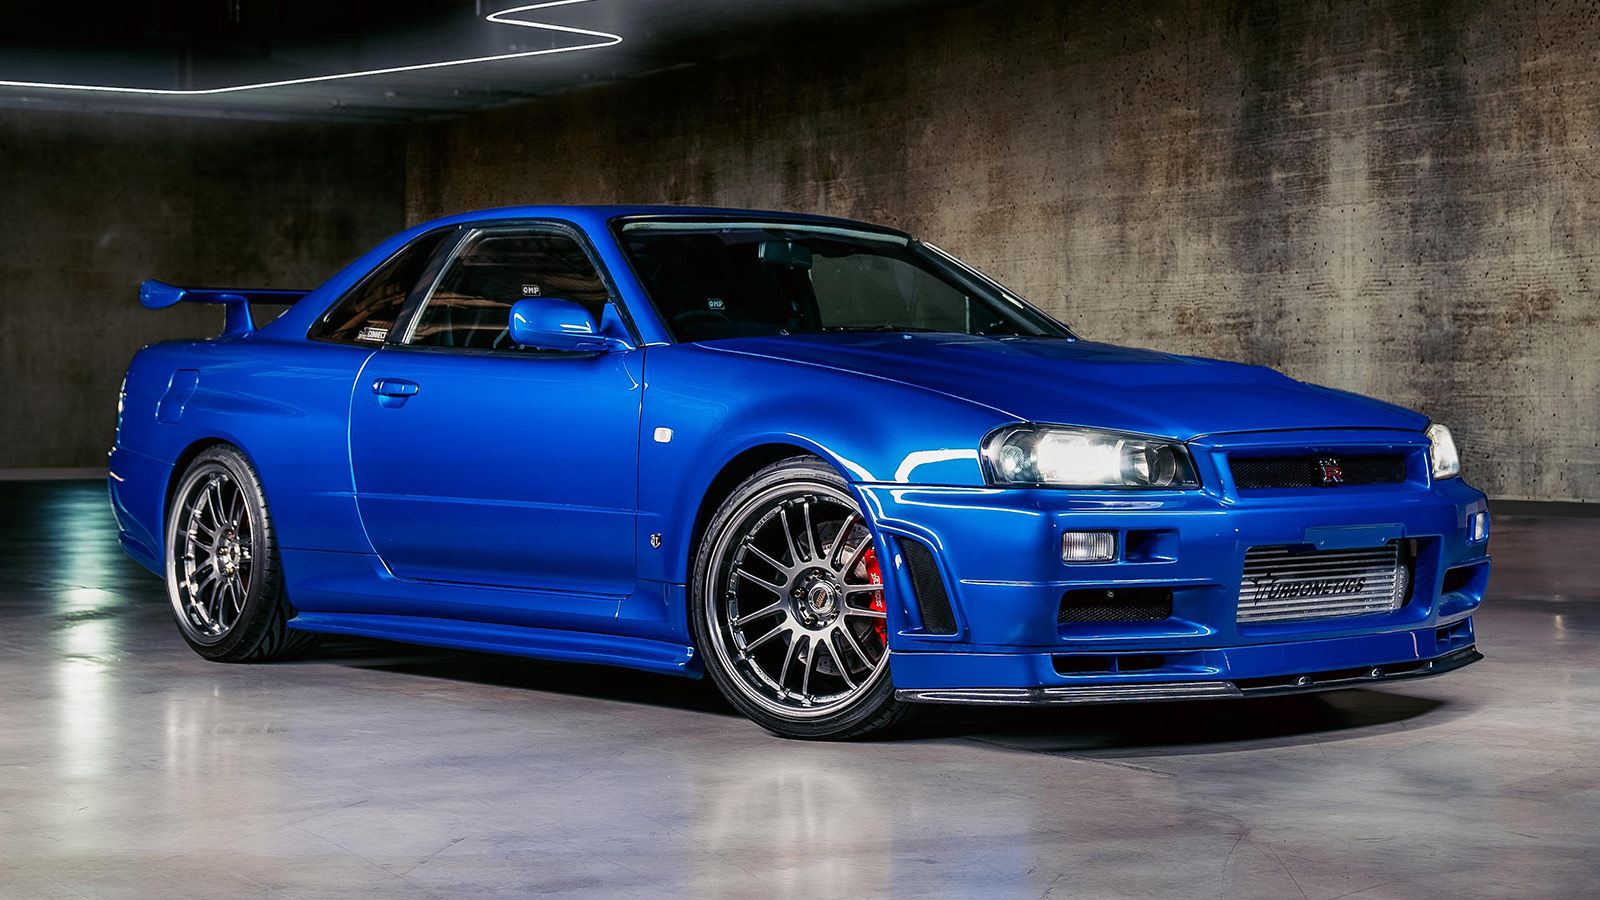 2000 Nissan Skyline R34 GT-R by Kaizo Industries Driven by Paul Walker in 'Fast and Furious'